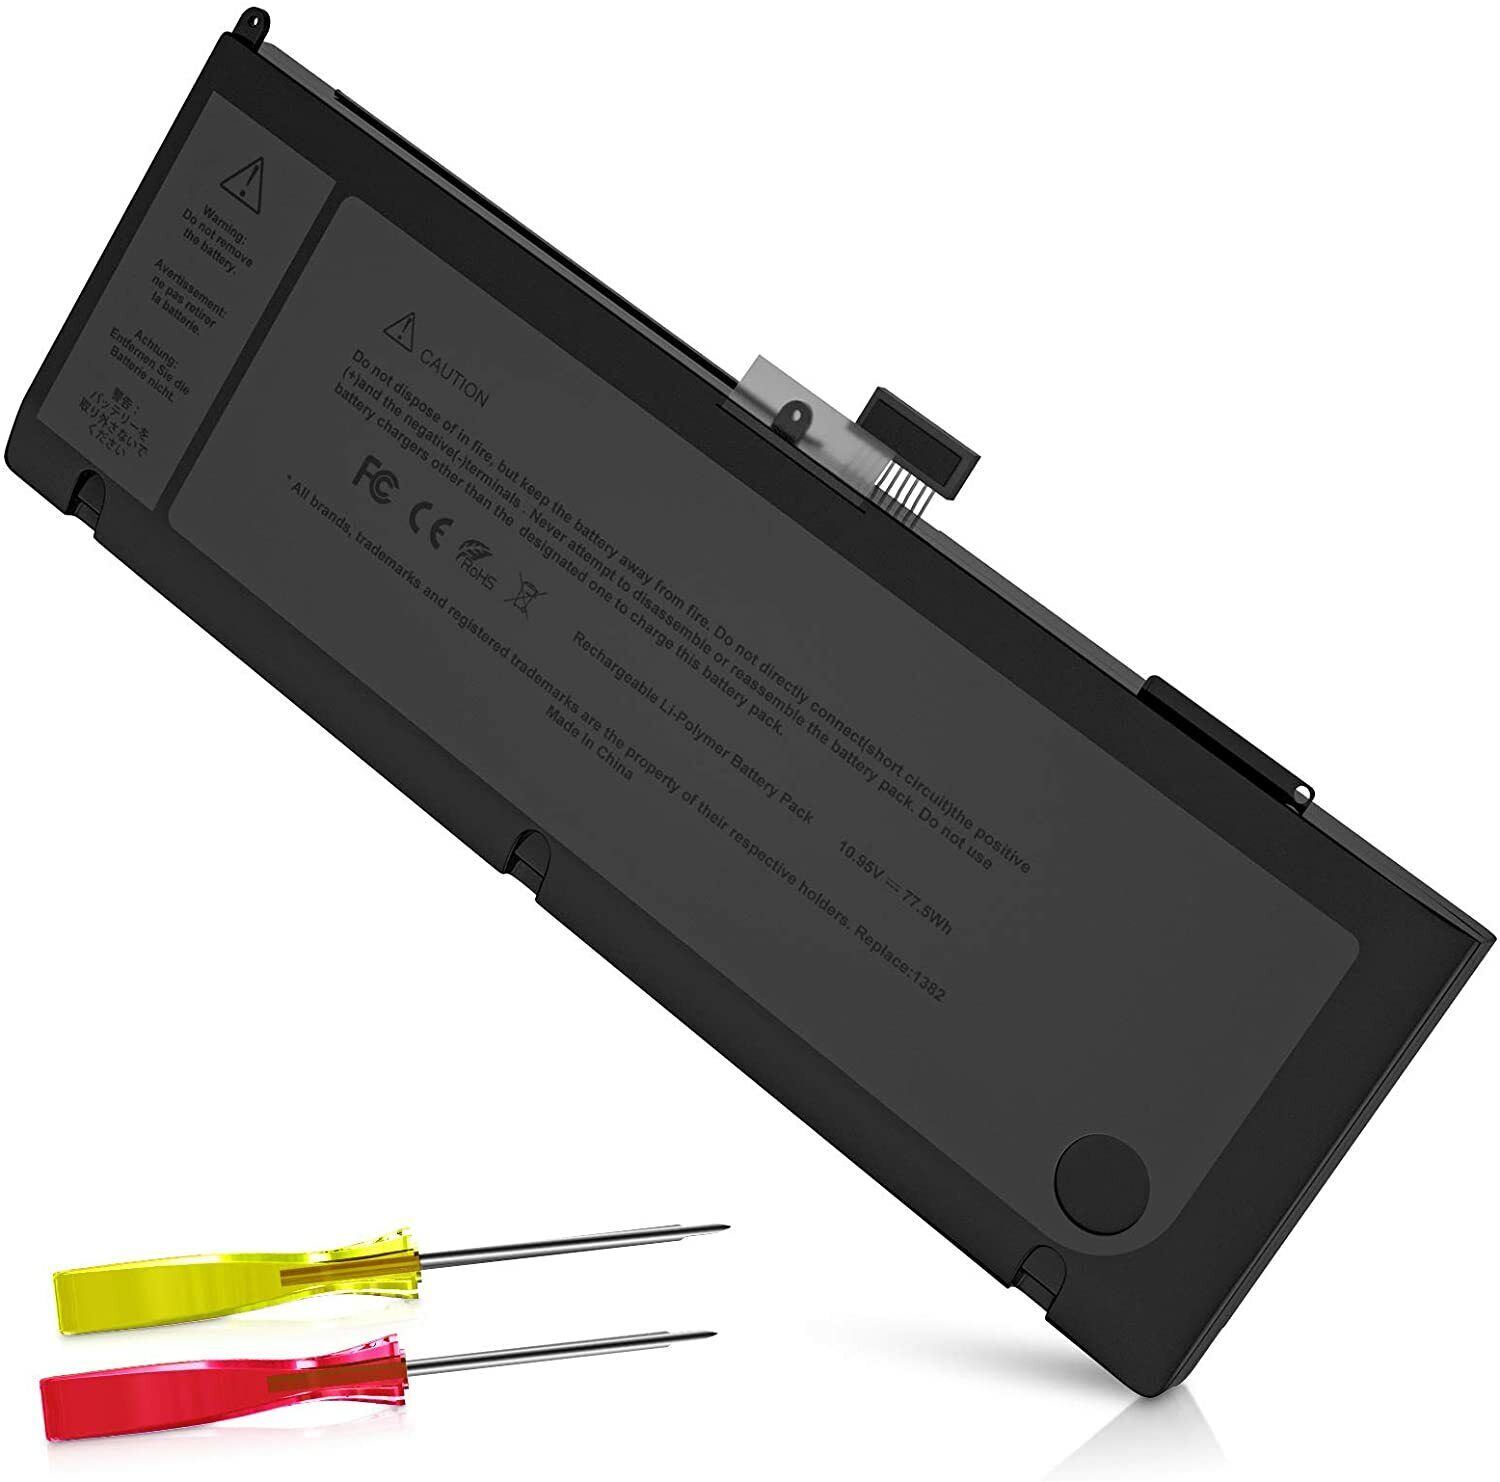 A1382 Battery For Apple MacBook Pro 15 inch A1286 Early 2011 Late 2011 Mid 2012